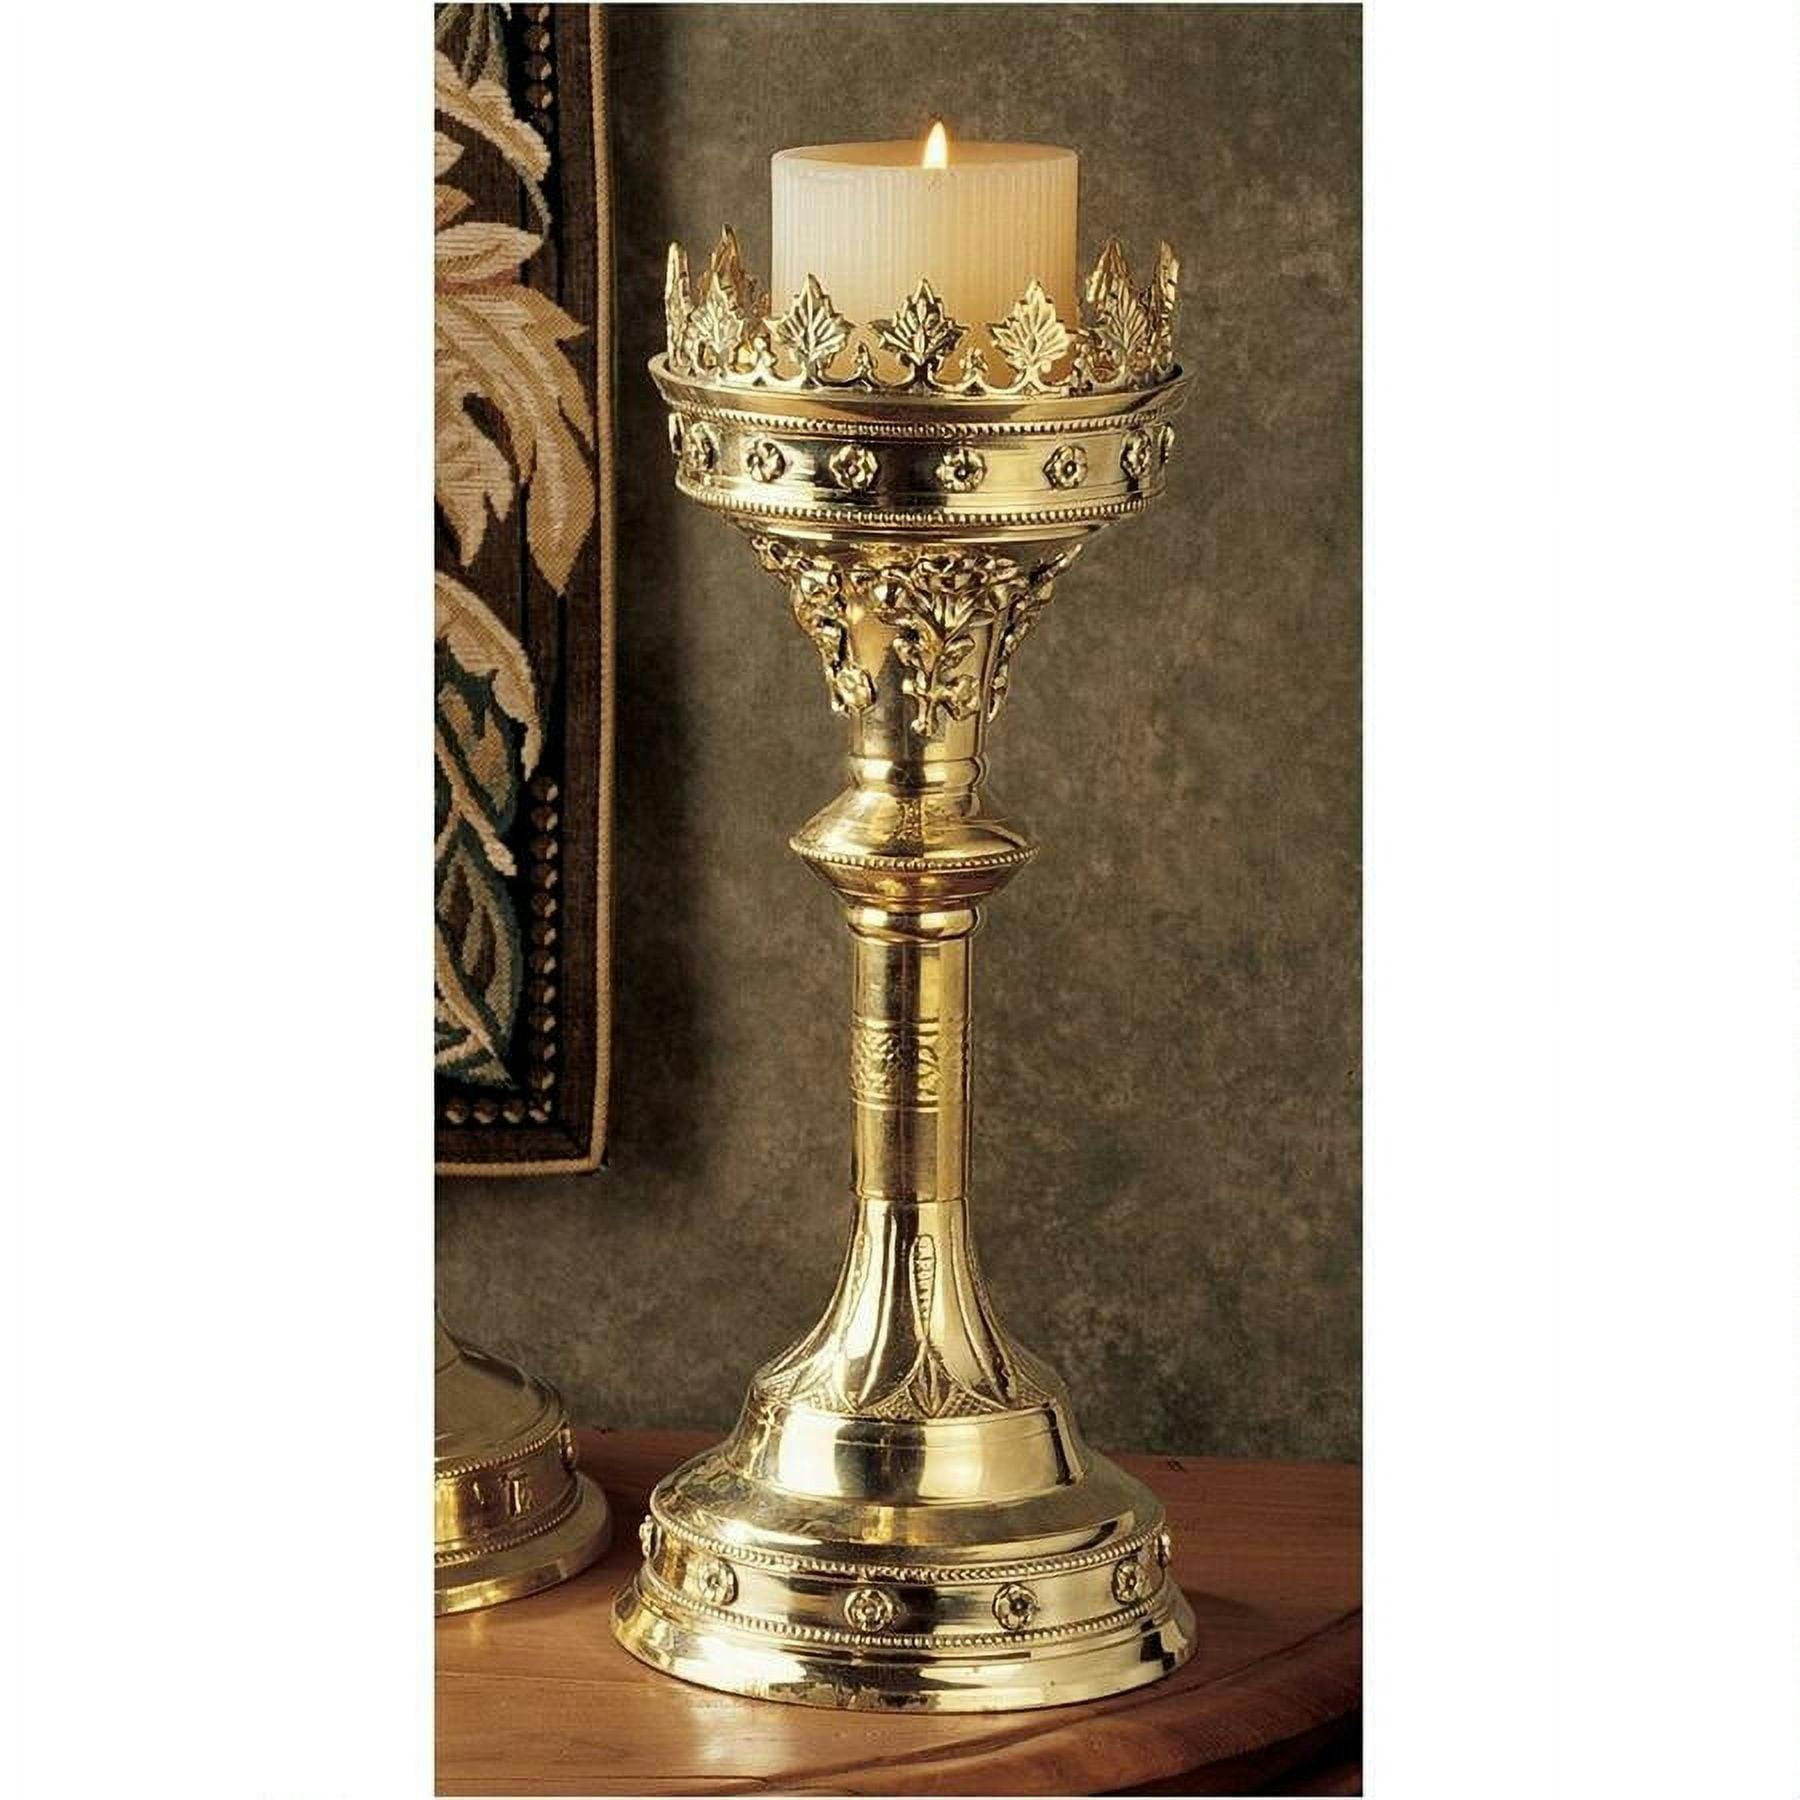 Regal Crown Brass Candlestick with Beaded Edges and Fretwork - 20"x12"